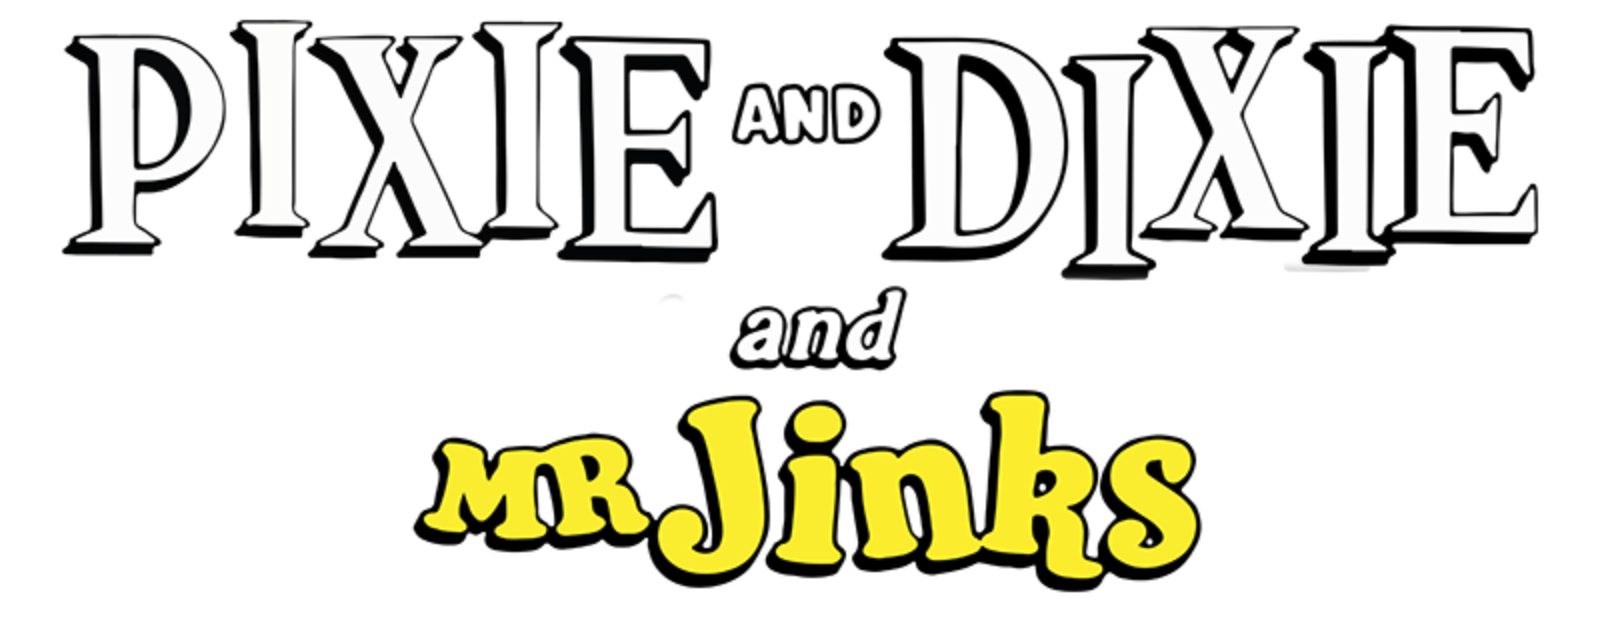 Pixie and Dixie and Mr Jinks 